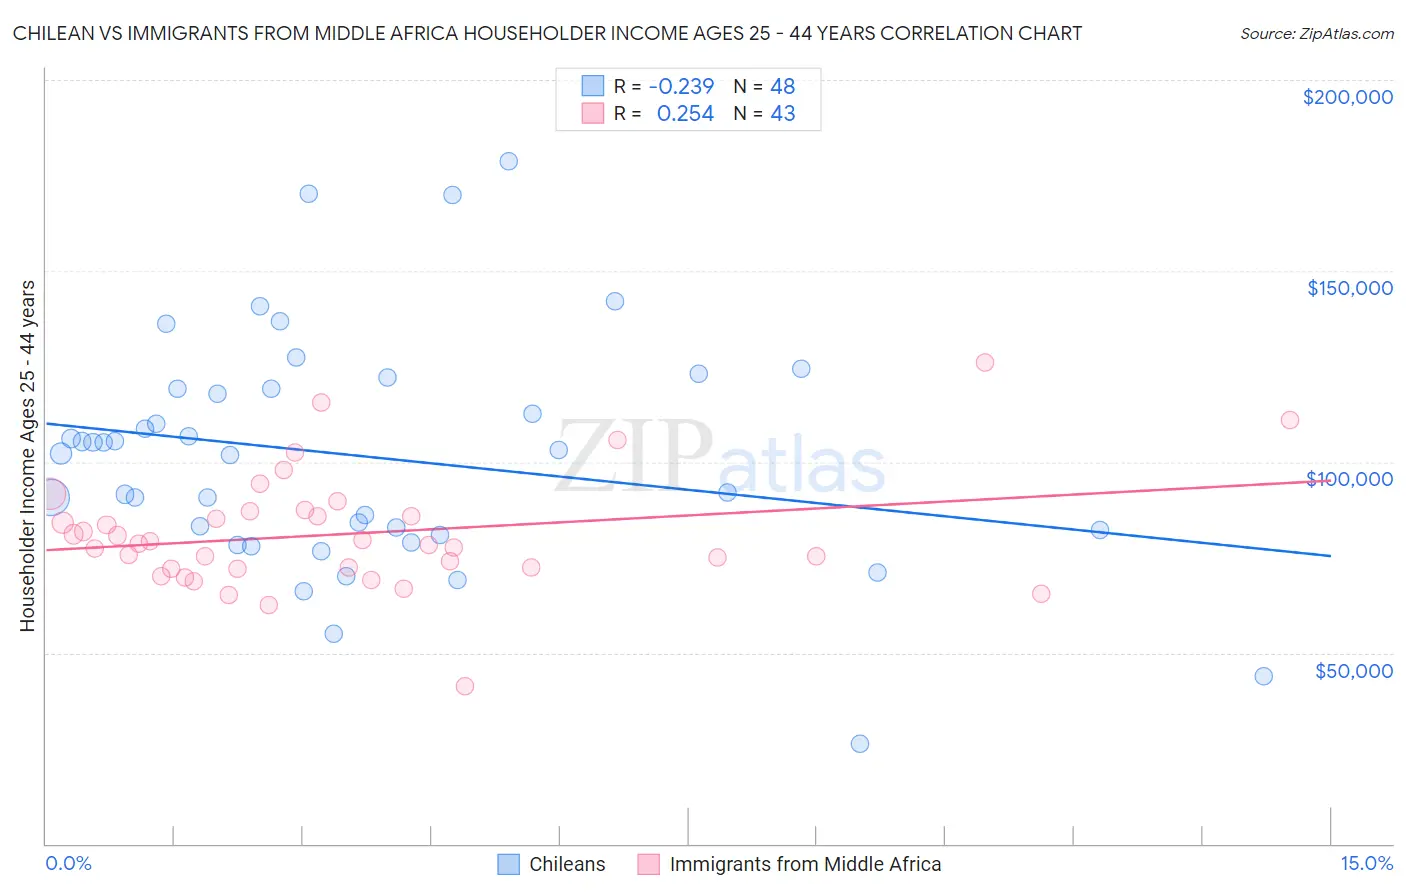 Chilean vs Immigrants from Middle Africa Householder Income Ages 25 - 44 years